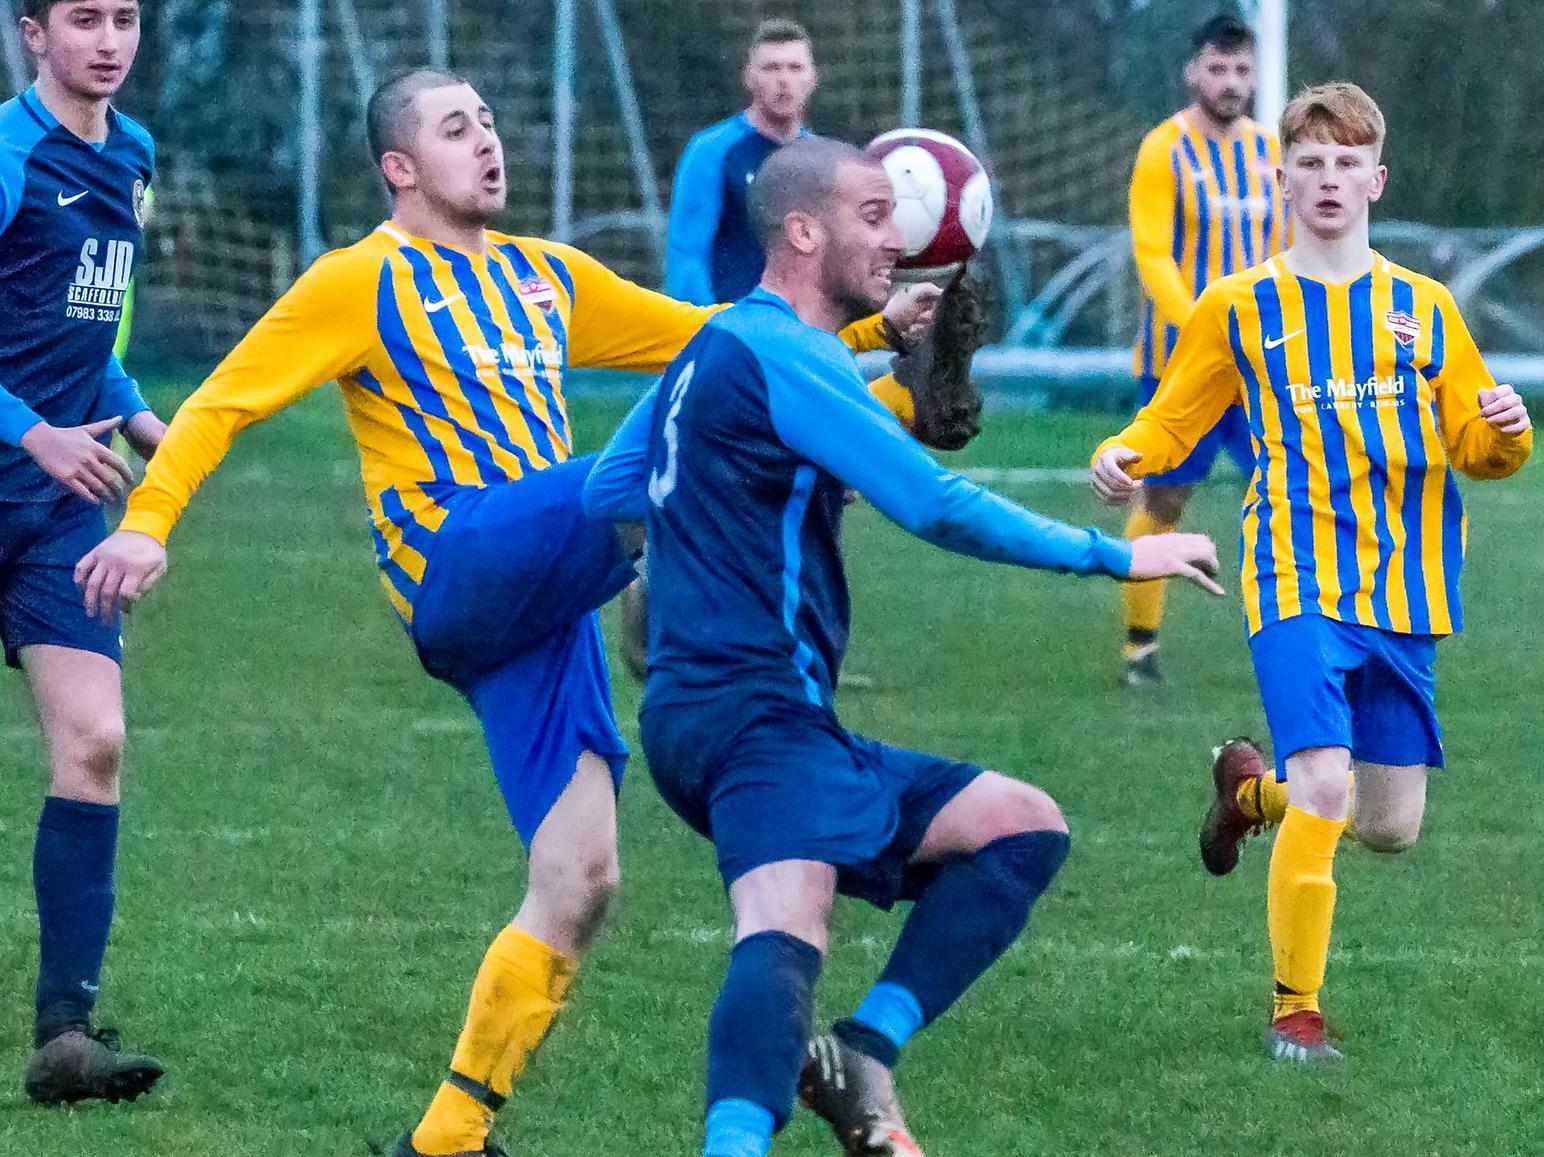 Whitby Fishermens Society 8-4 Seamer / North Riding FA Saturday Challenge Cup / Pictures by Brian Murfield